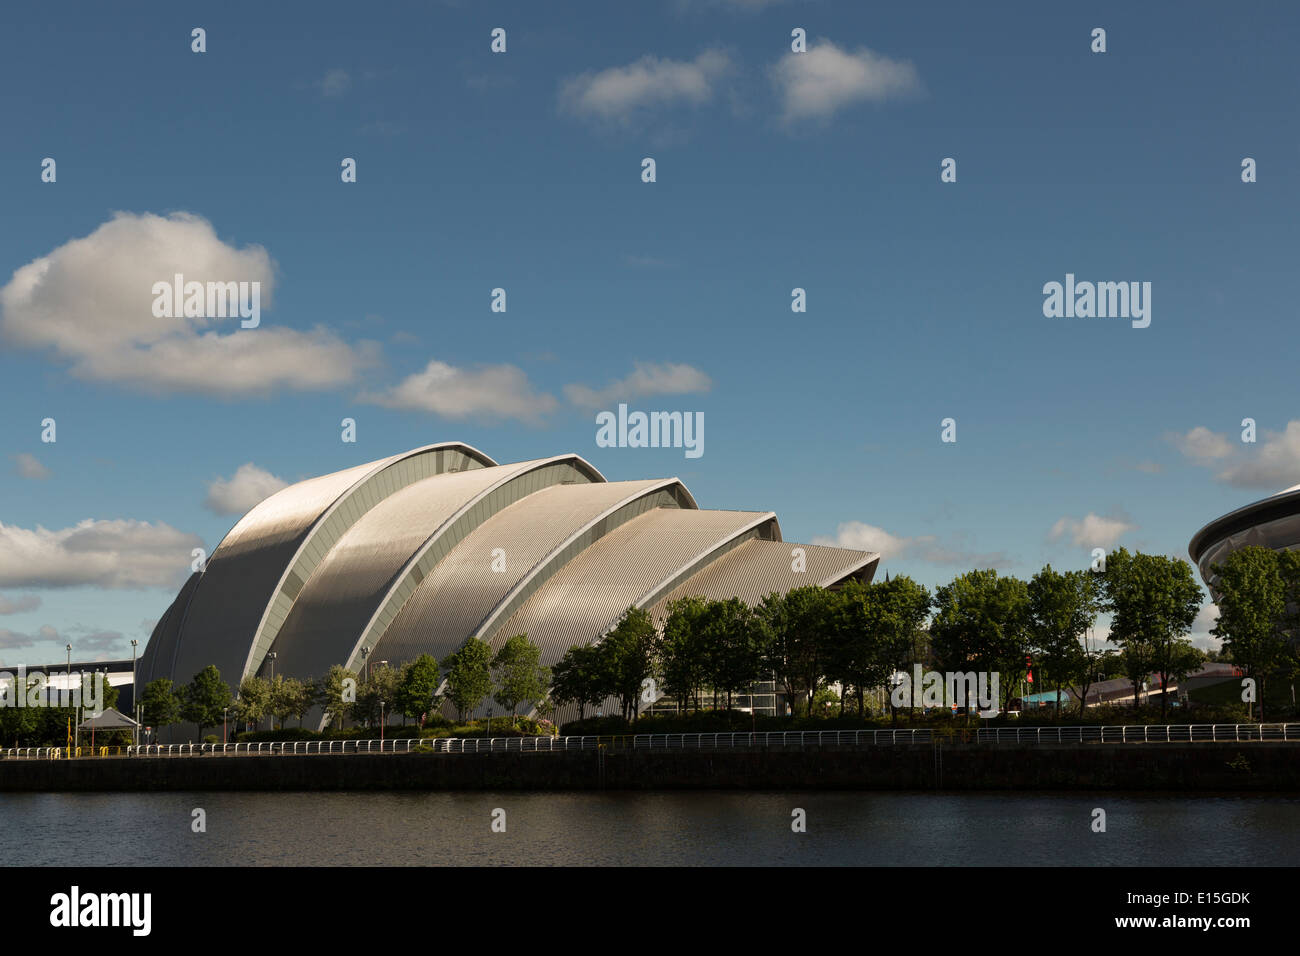 A view of the Clyde Auditorium from across the River Clyde in Glasgow, Scotland, UK Stock Photo